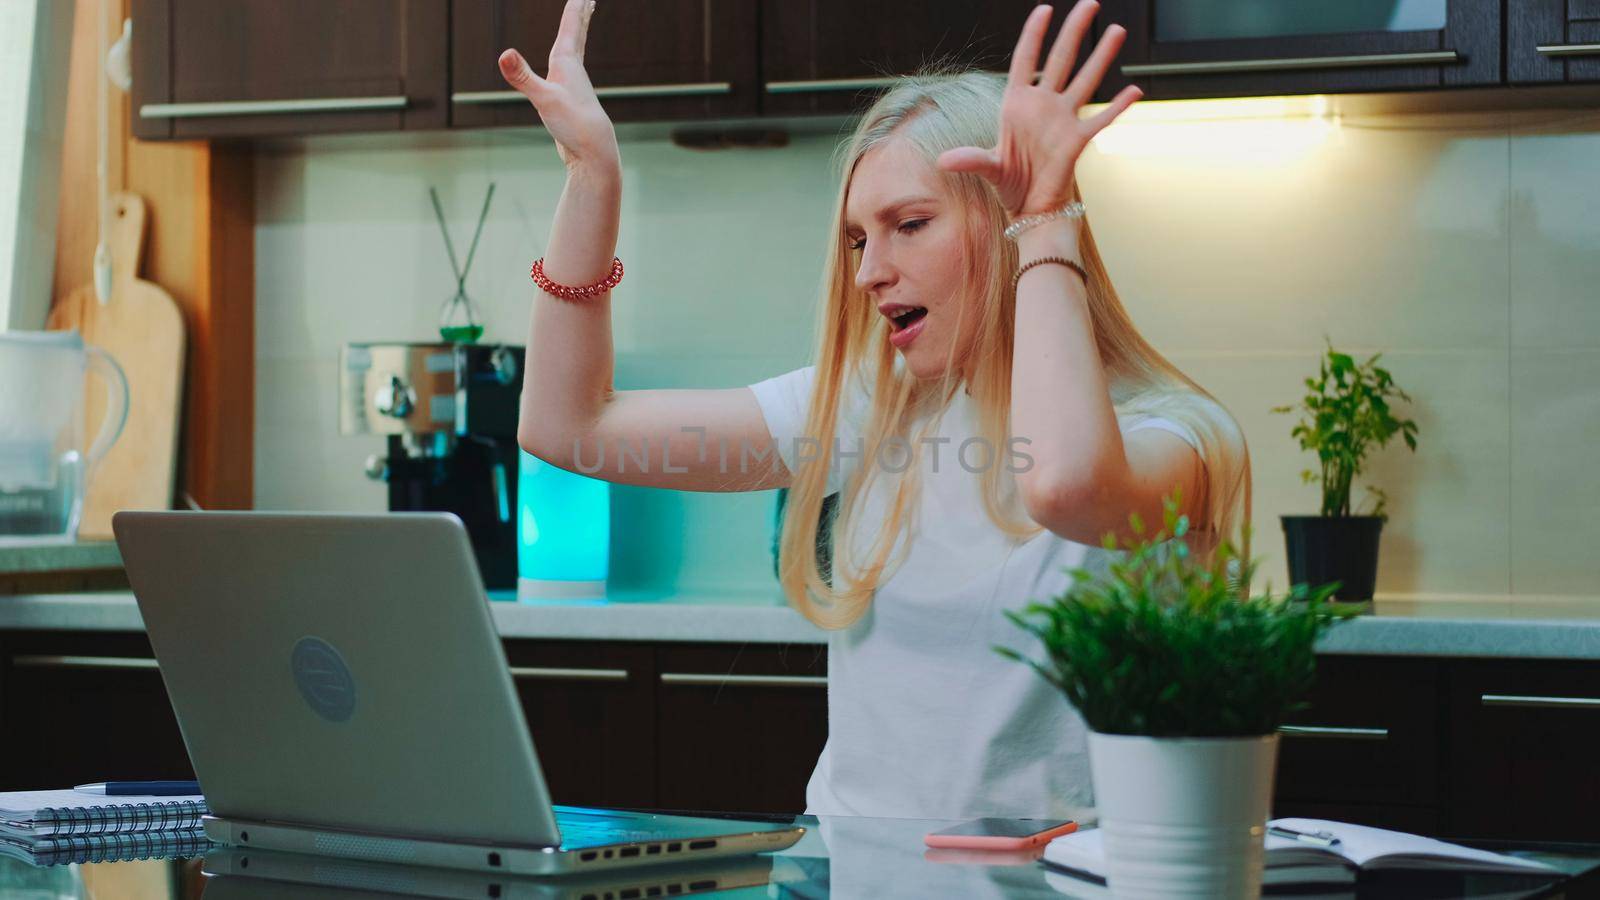 Blonde woman listening to the music and raising her arms in front of computer. She singing and sitting in the kitchen at home.